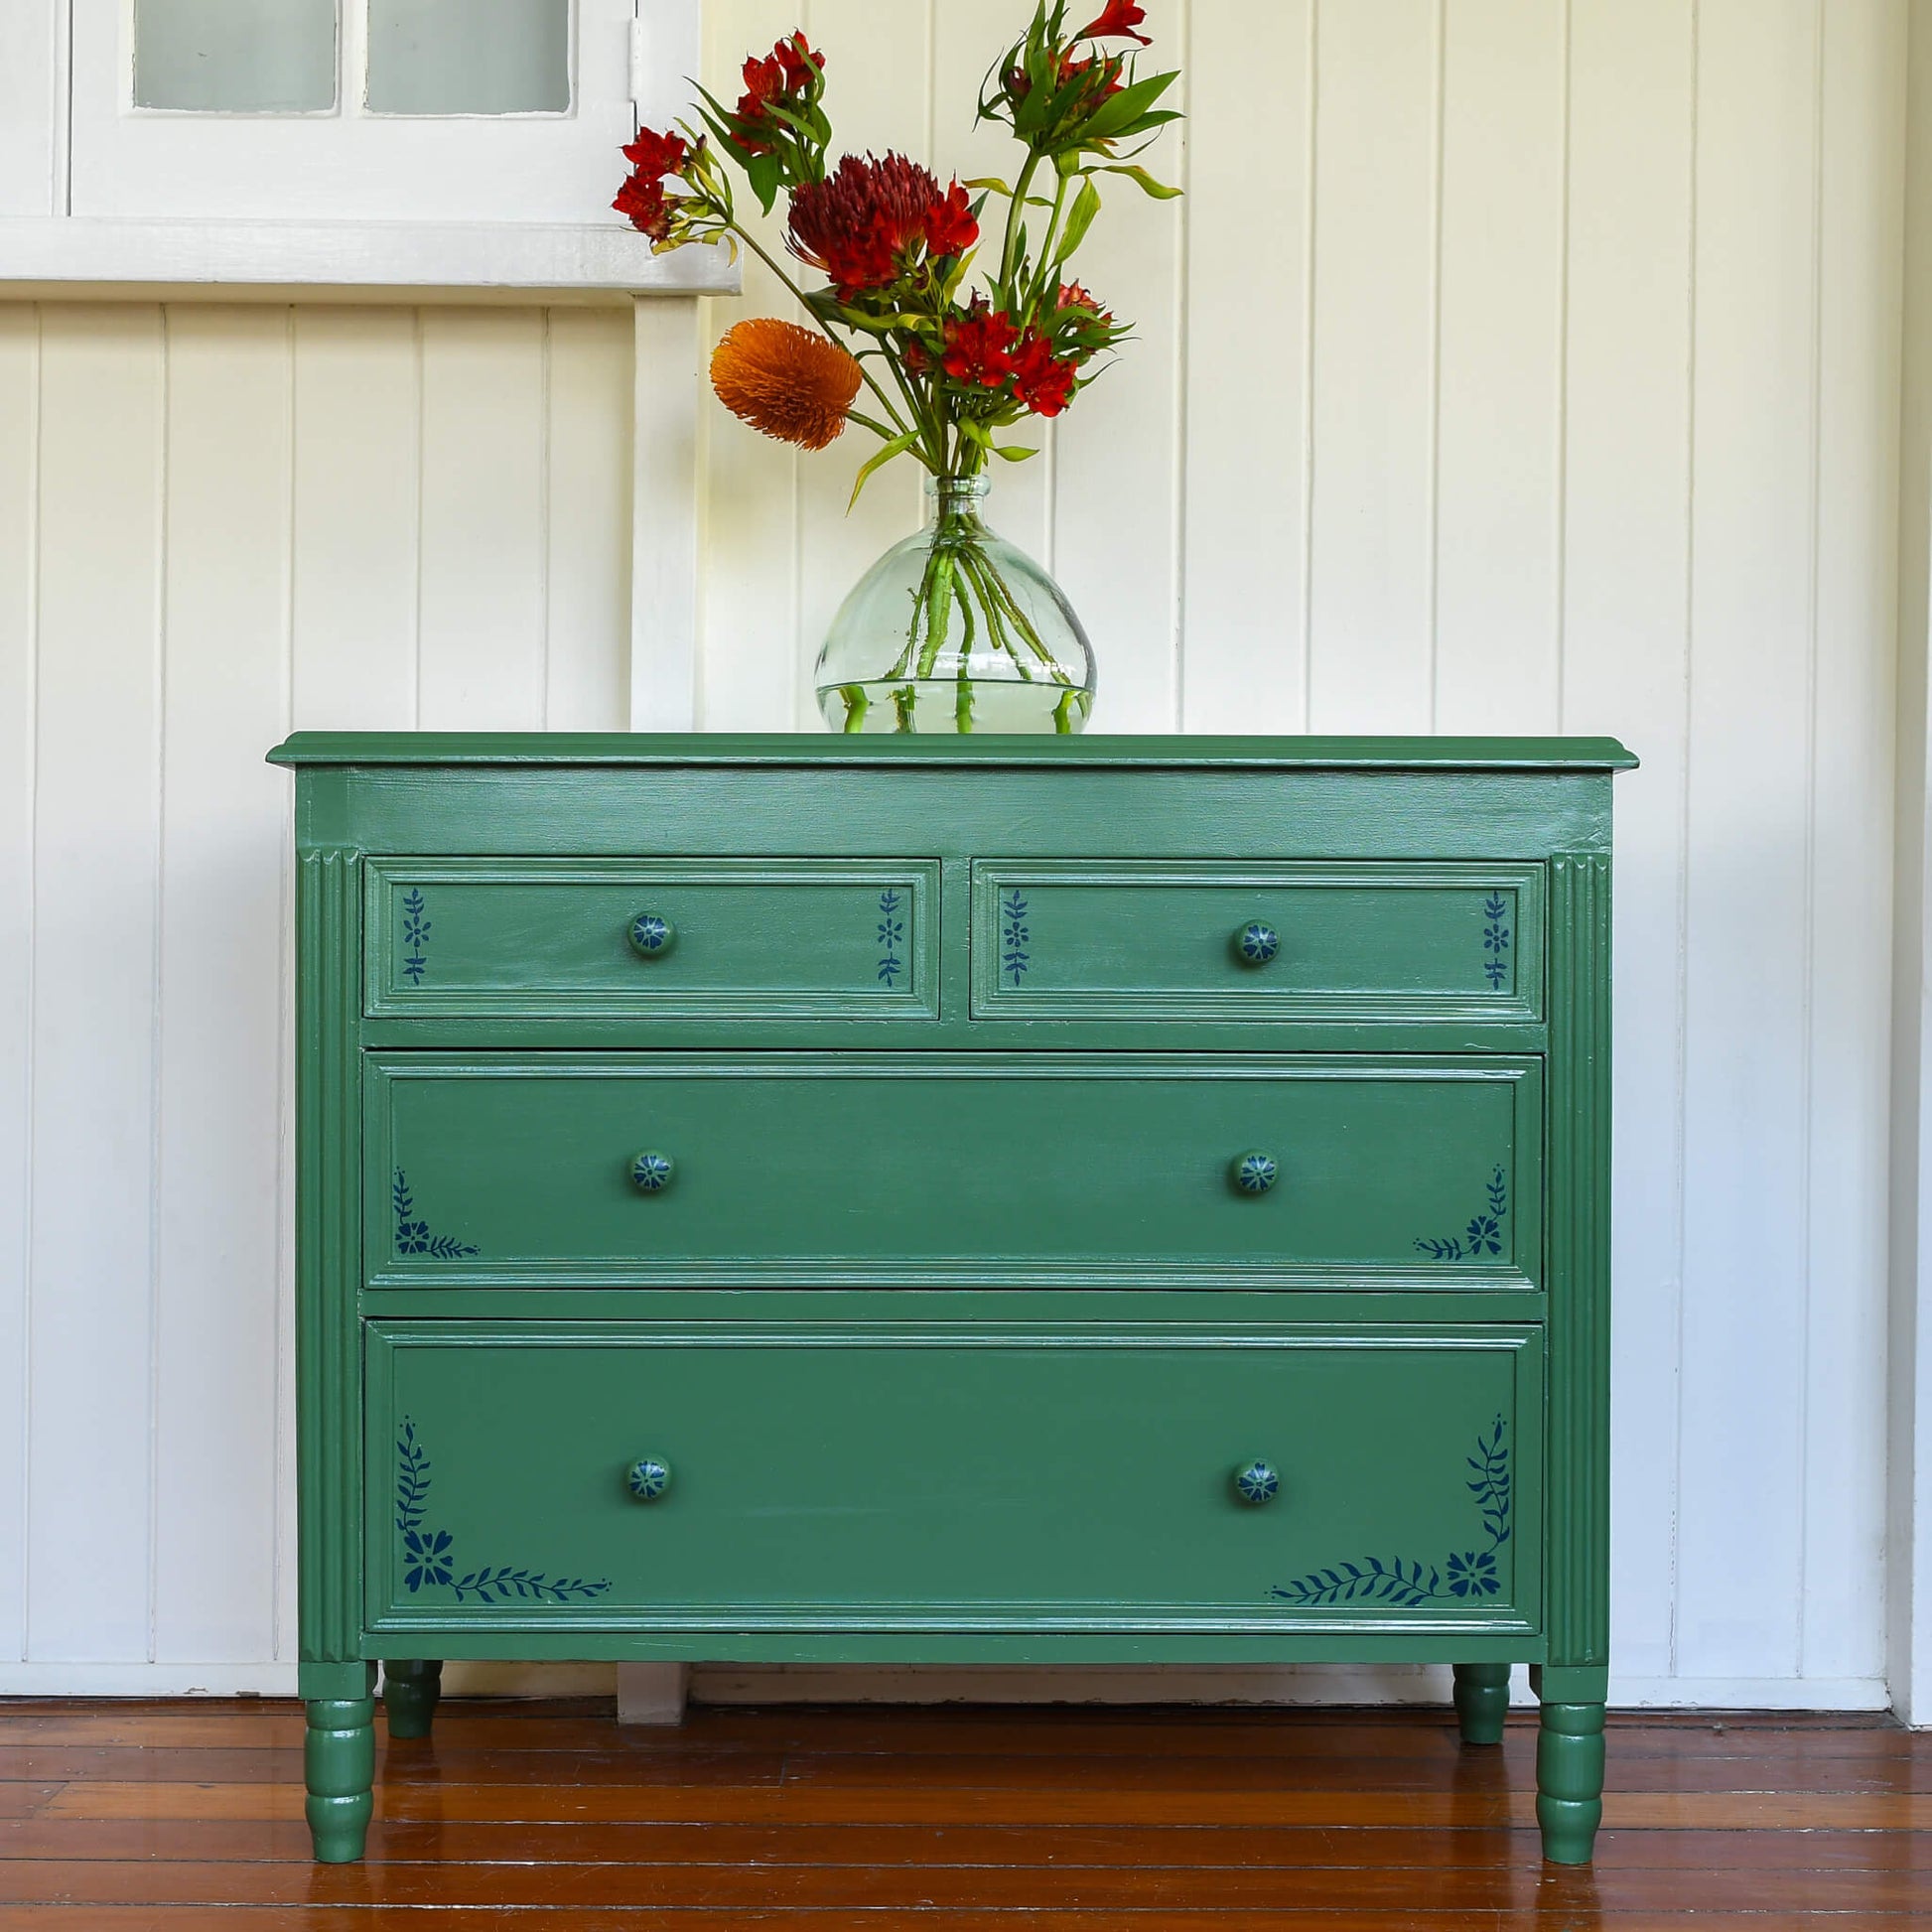 Vintage chest of drawers painted with Blake & Taylor Forest Chalk Furniture Paint